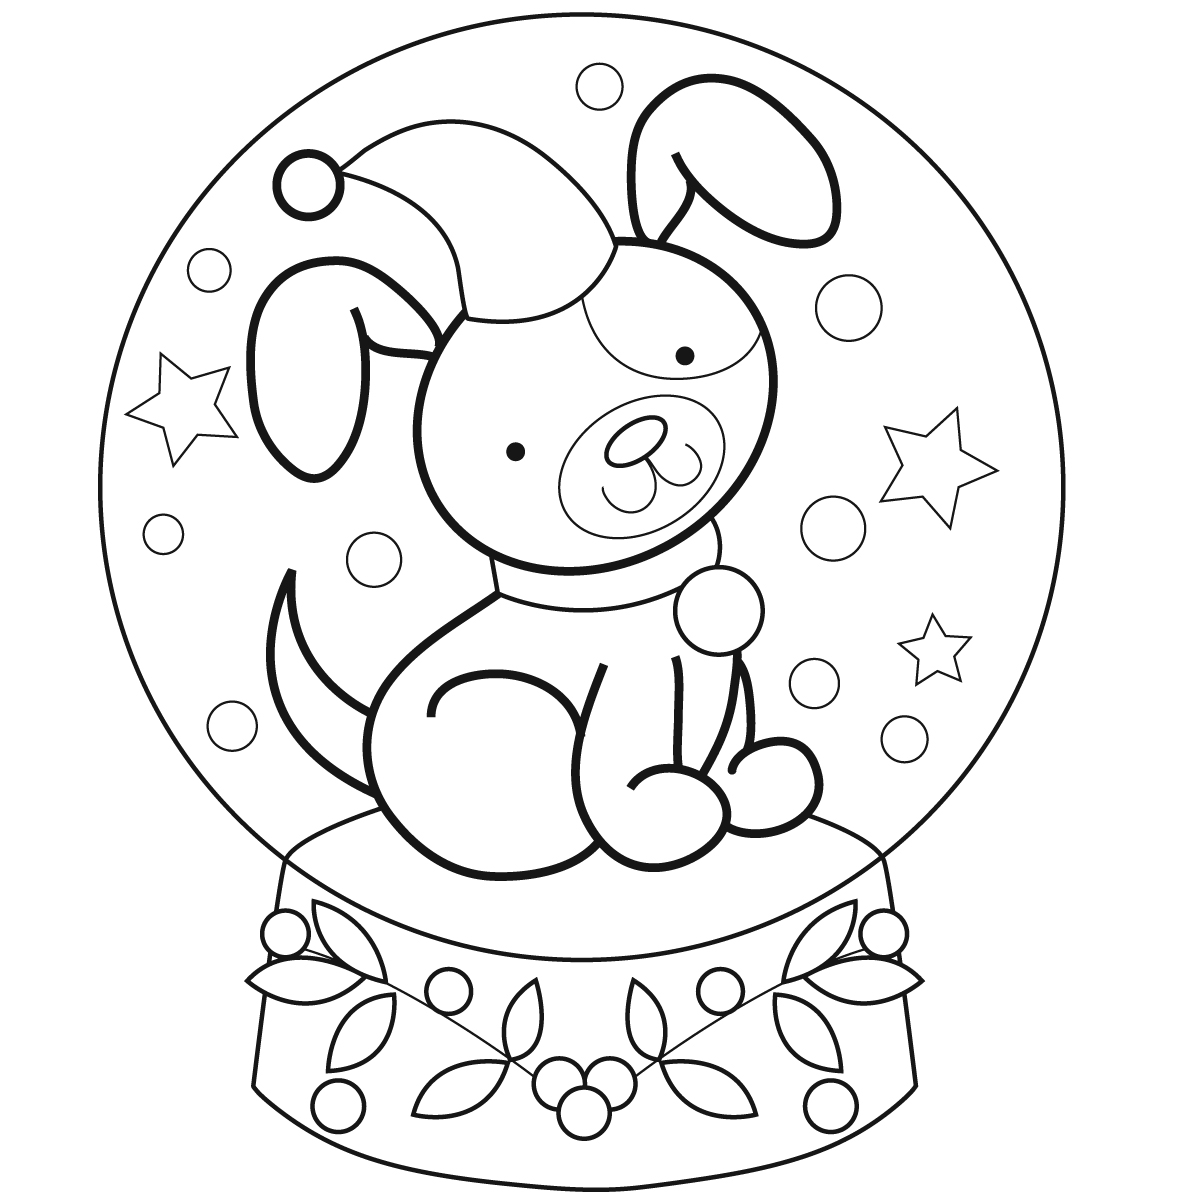 Coloring Pages December | Free download on ClipArtMag